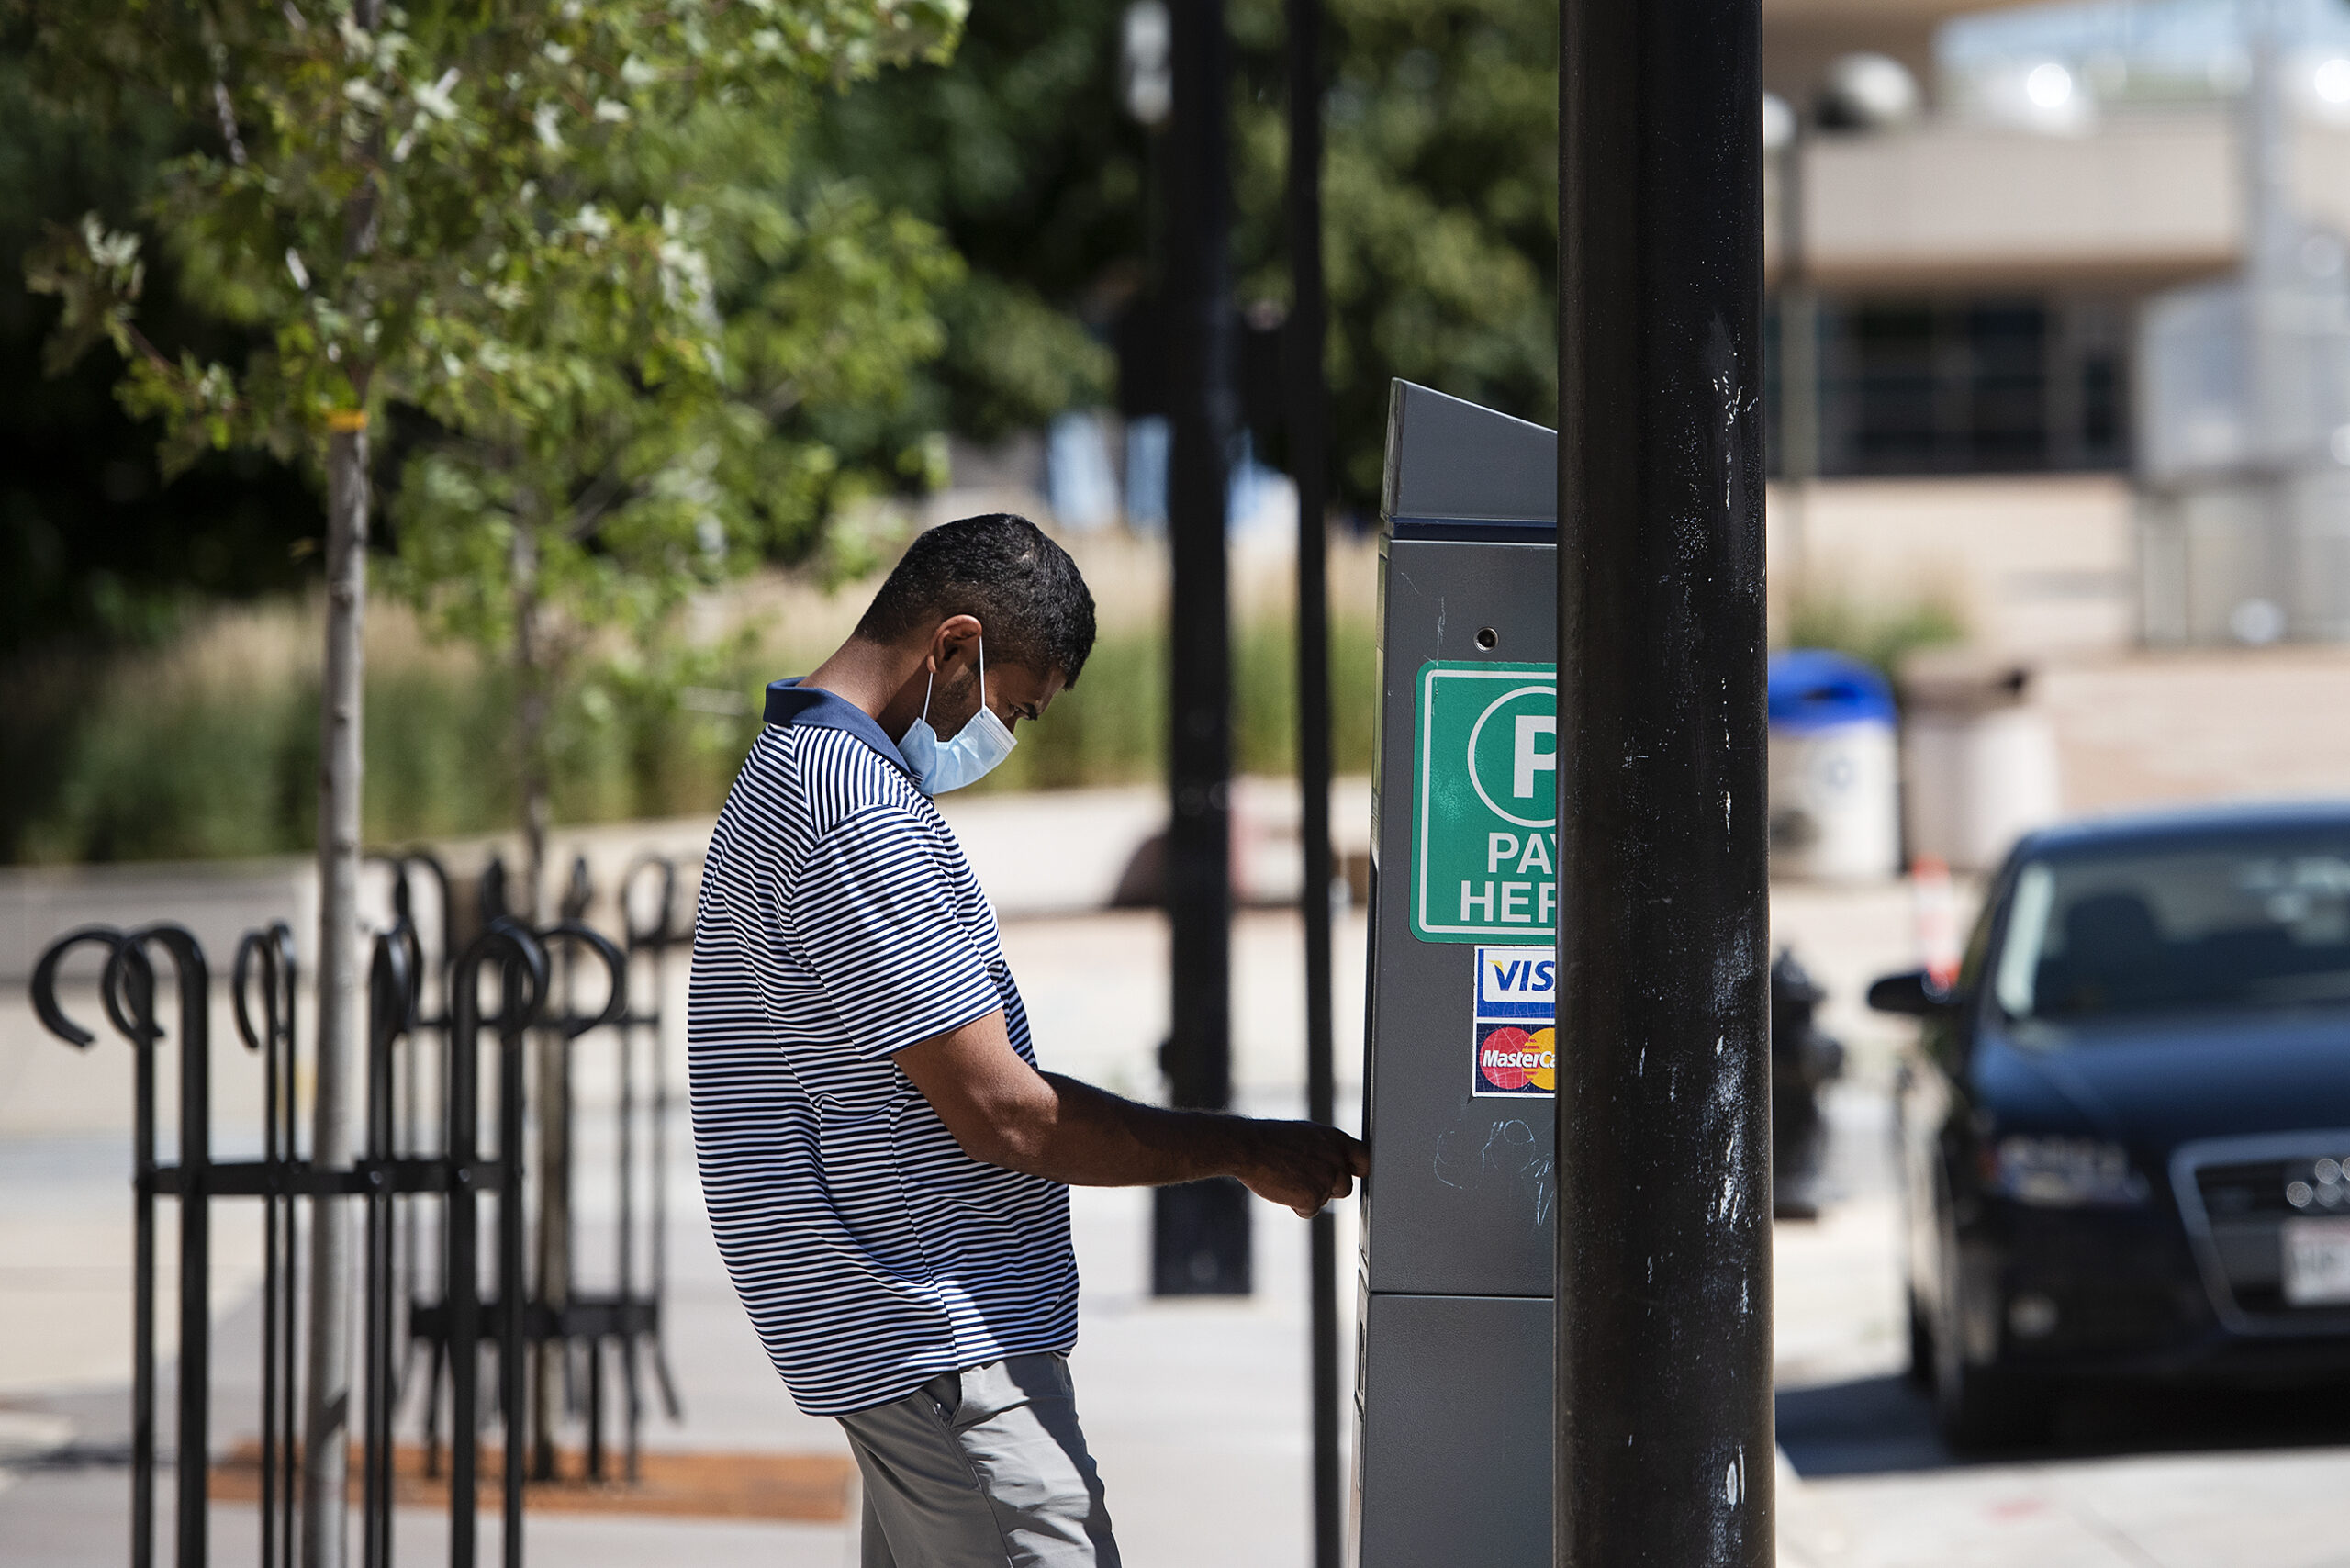 A man pays at a parking meter machine while wearing a mask